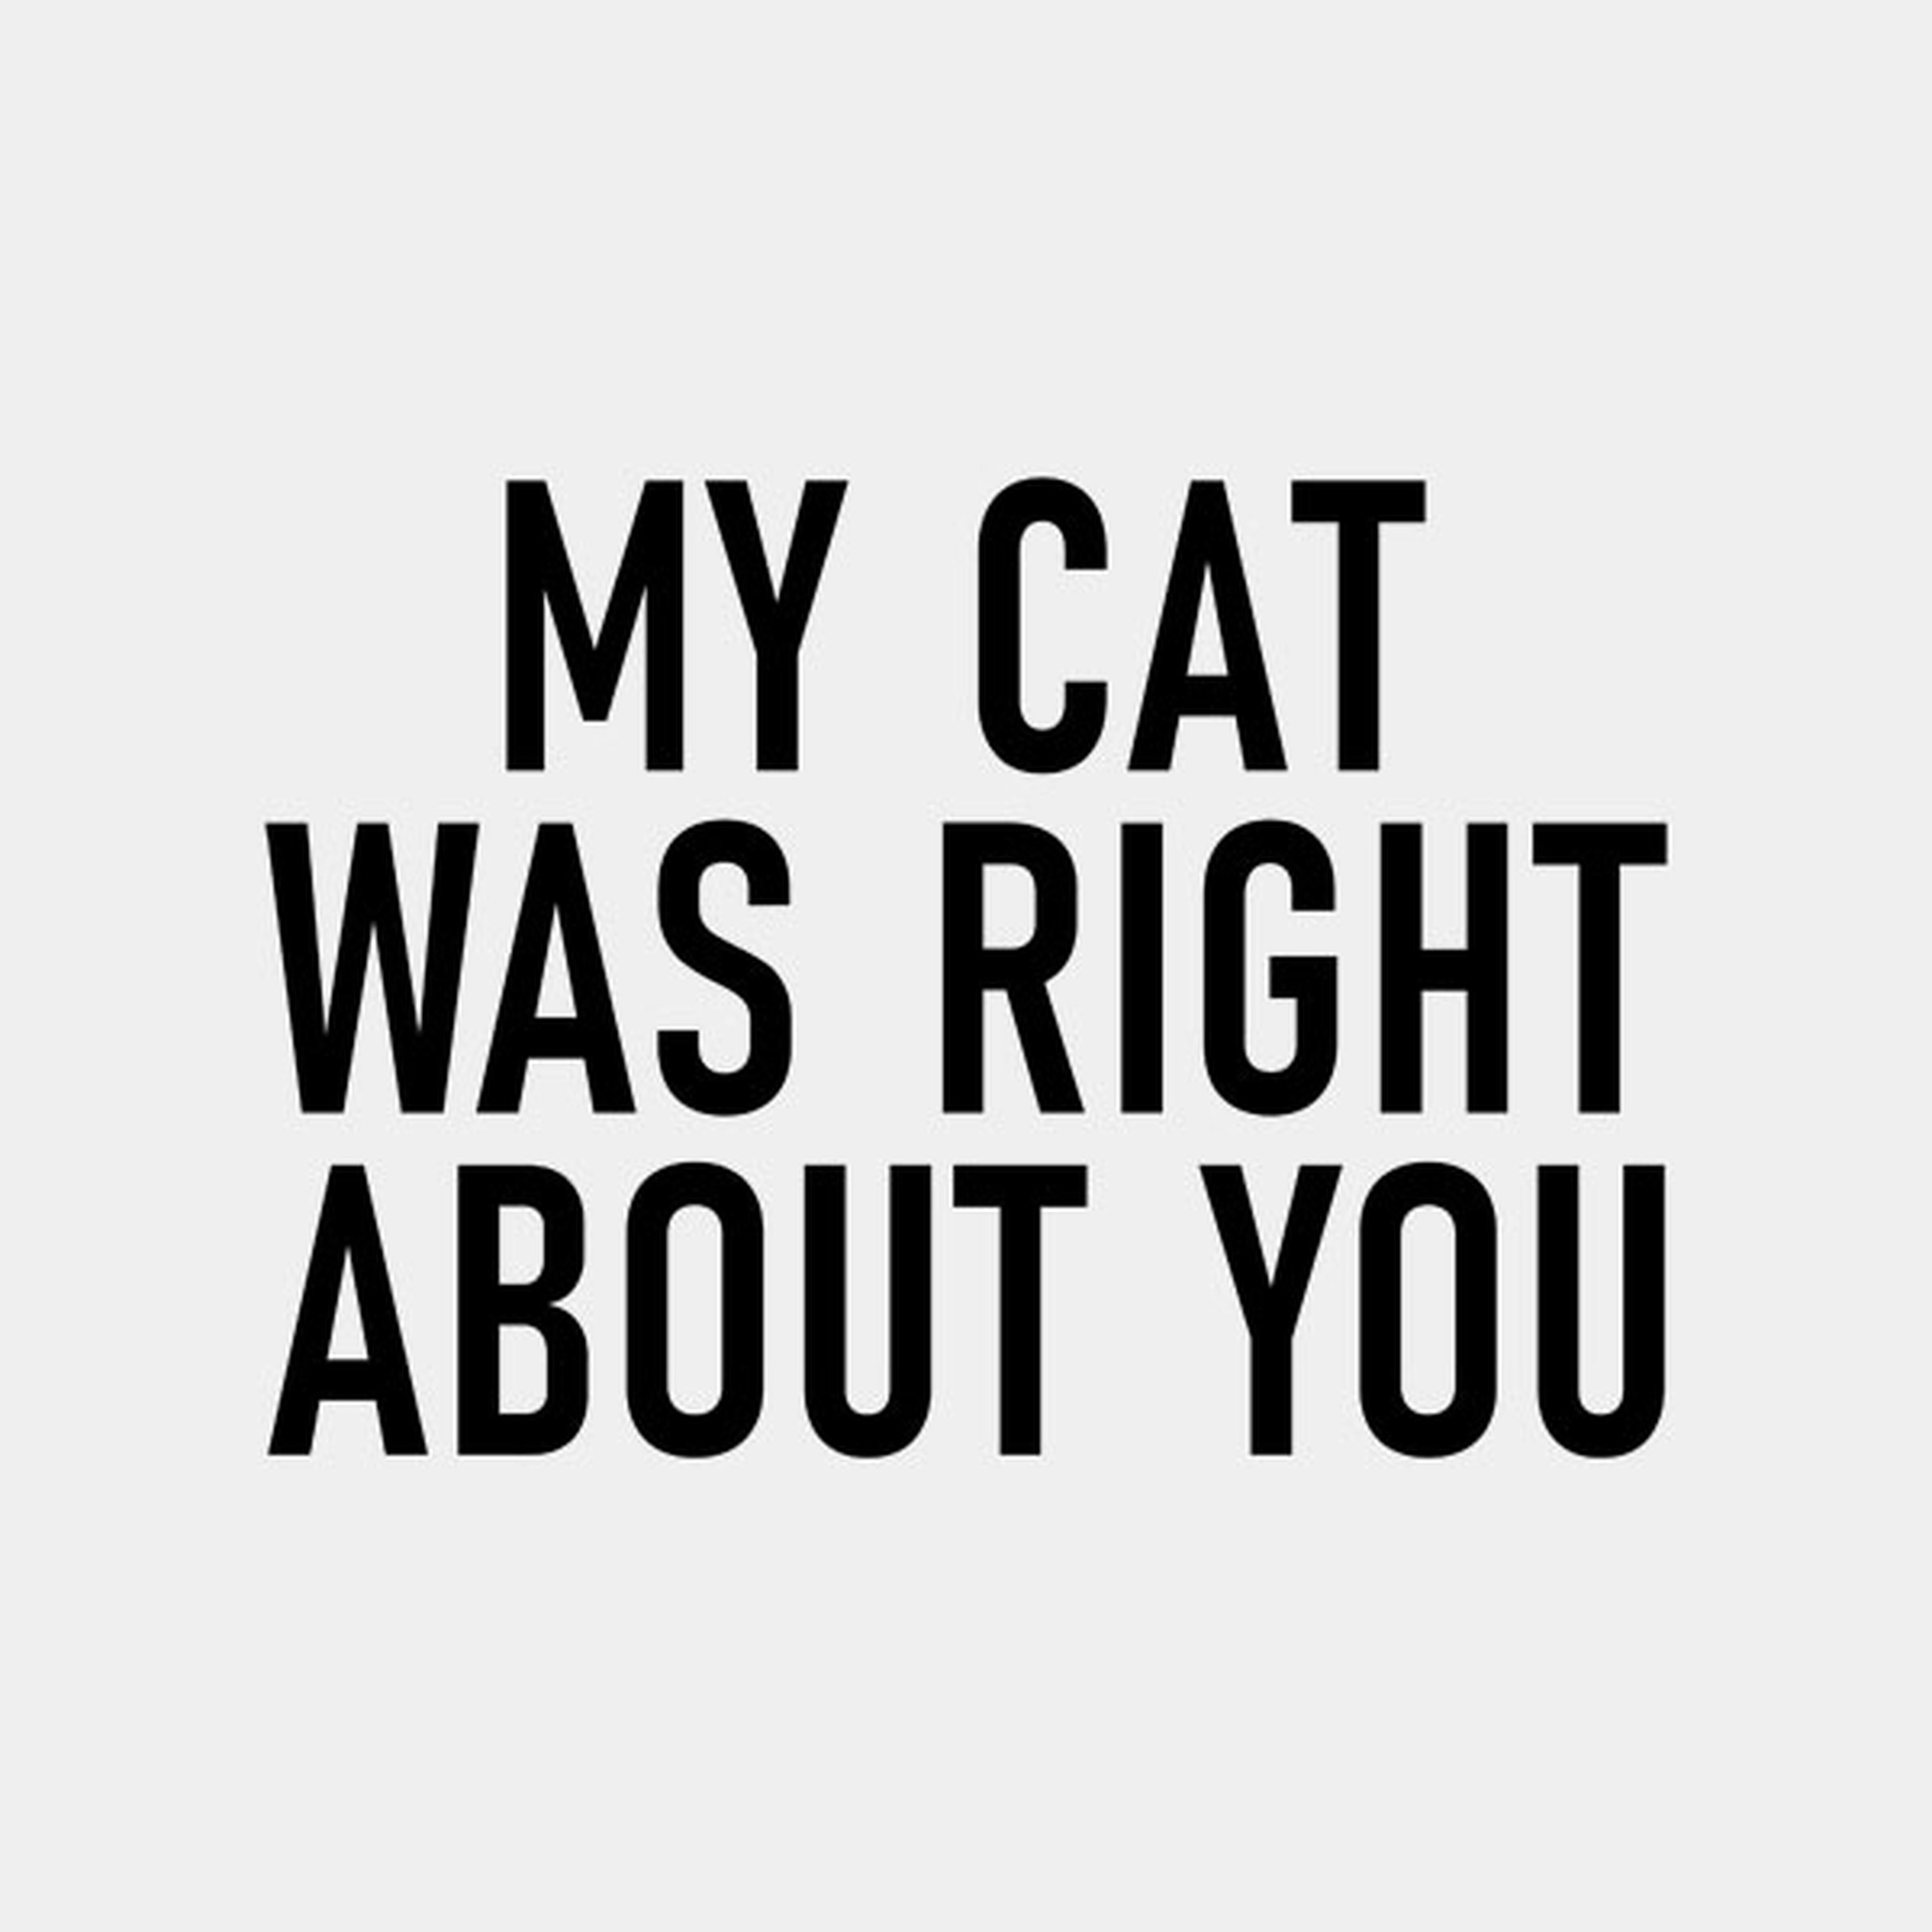 My cat was right about you - T-shirt